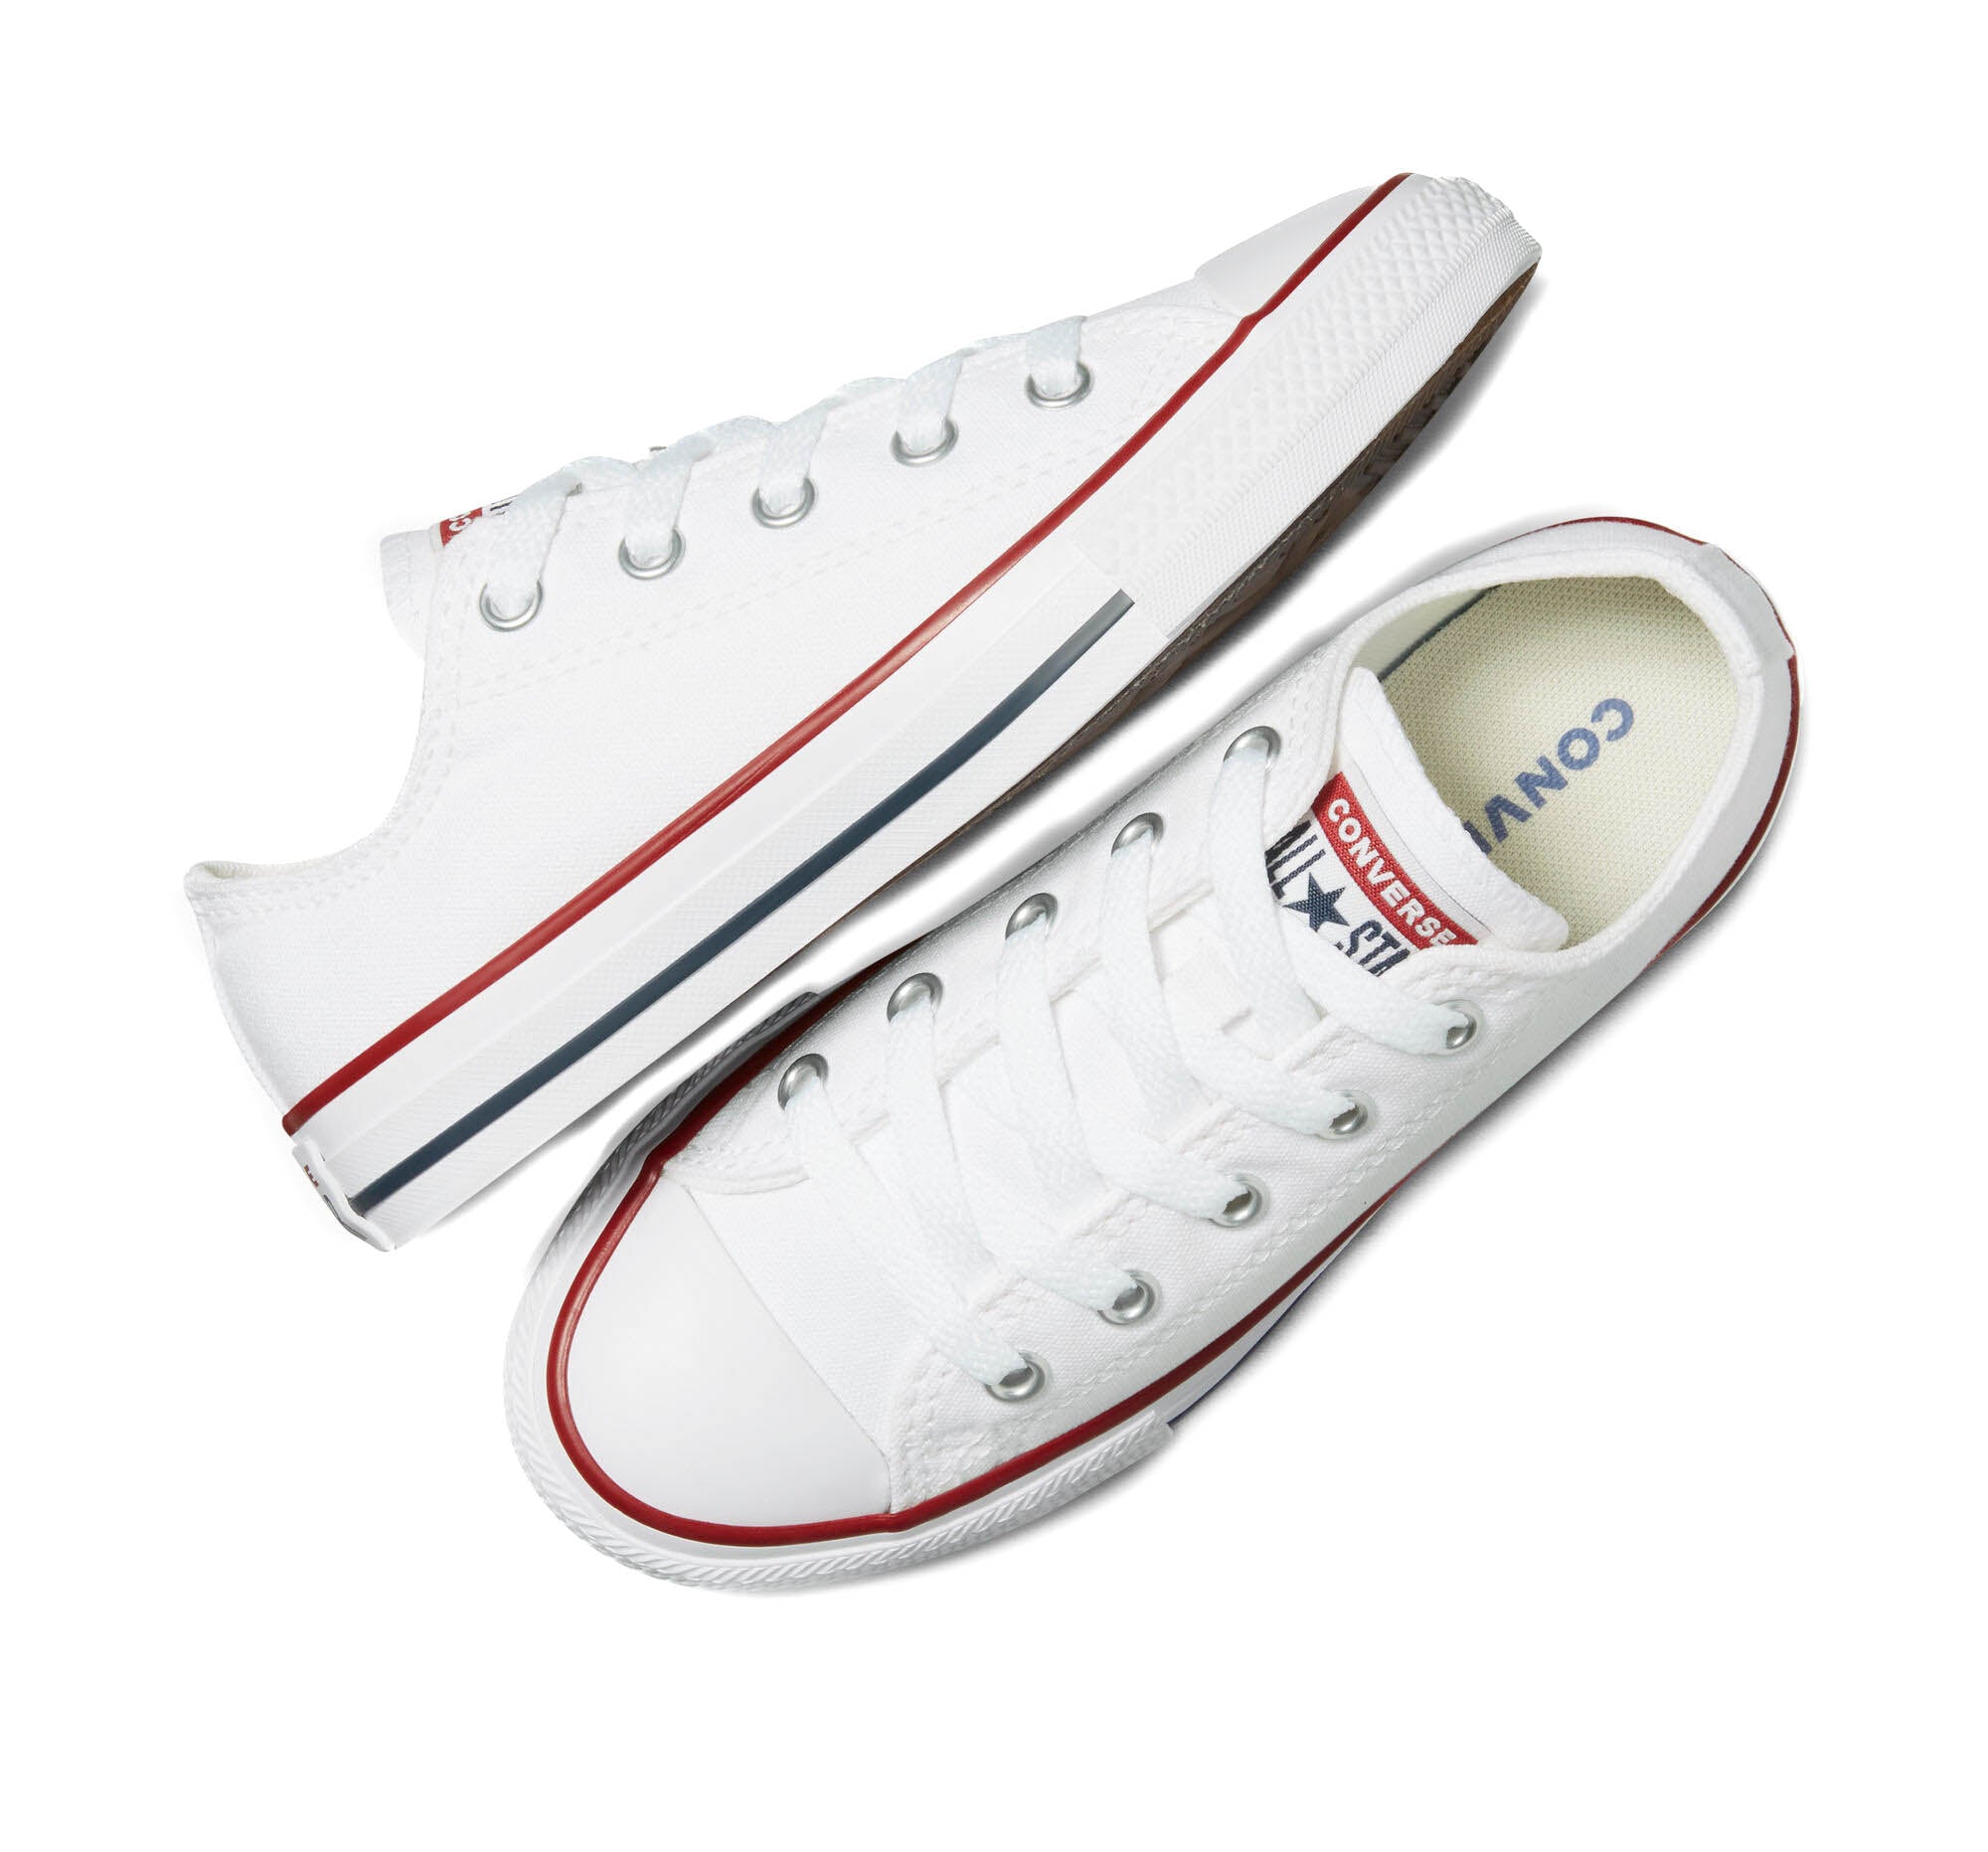 product image Youth Chuck Taylor All Star Seasonal Low Ox - Optical White